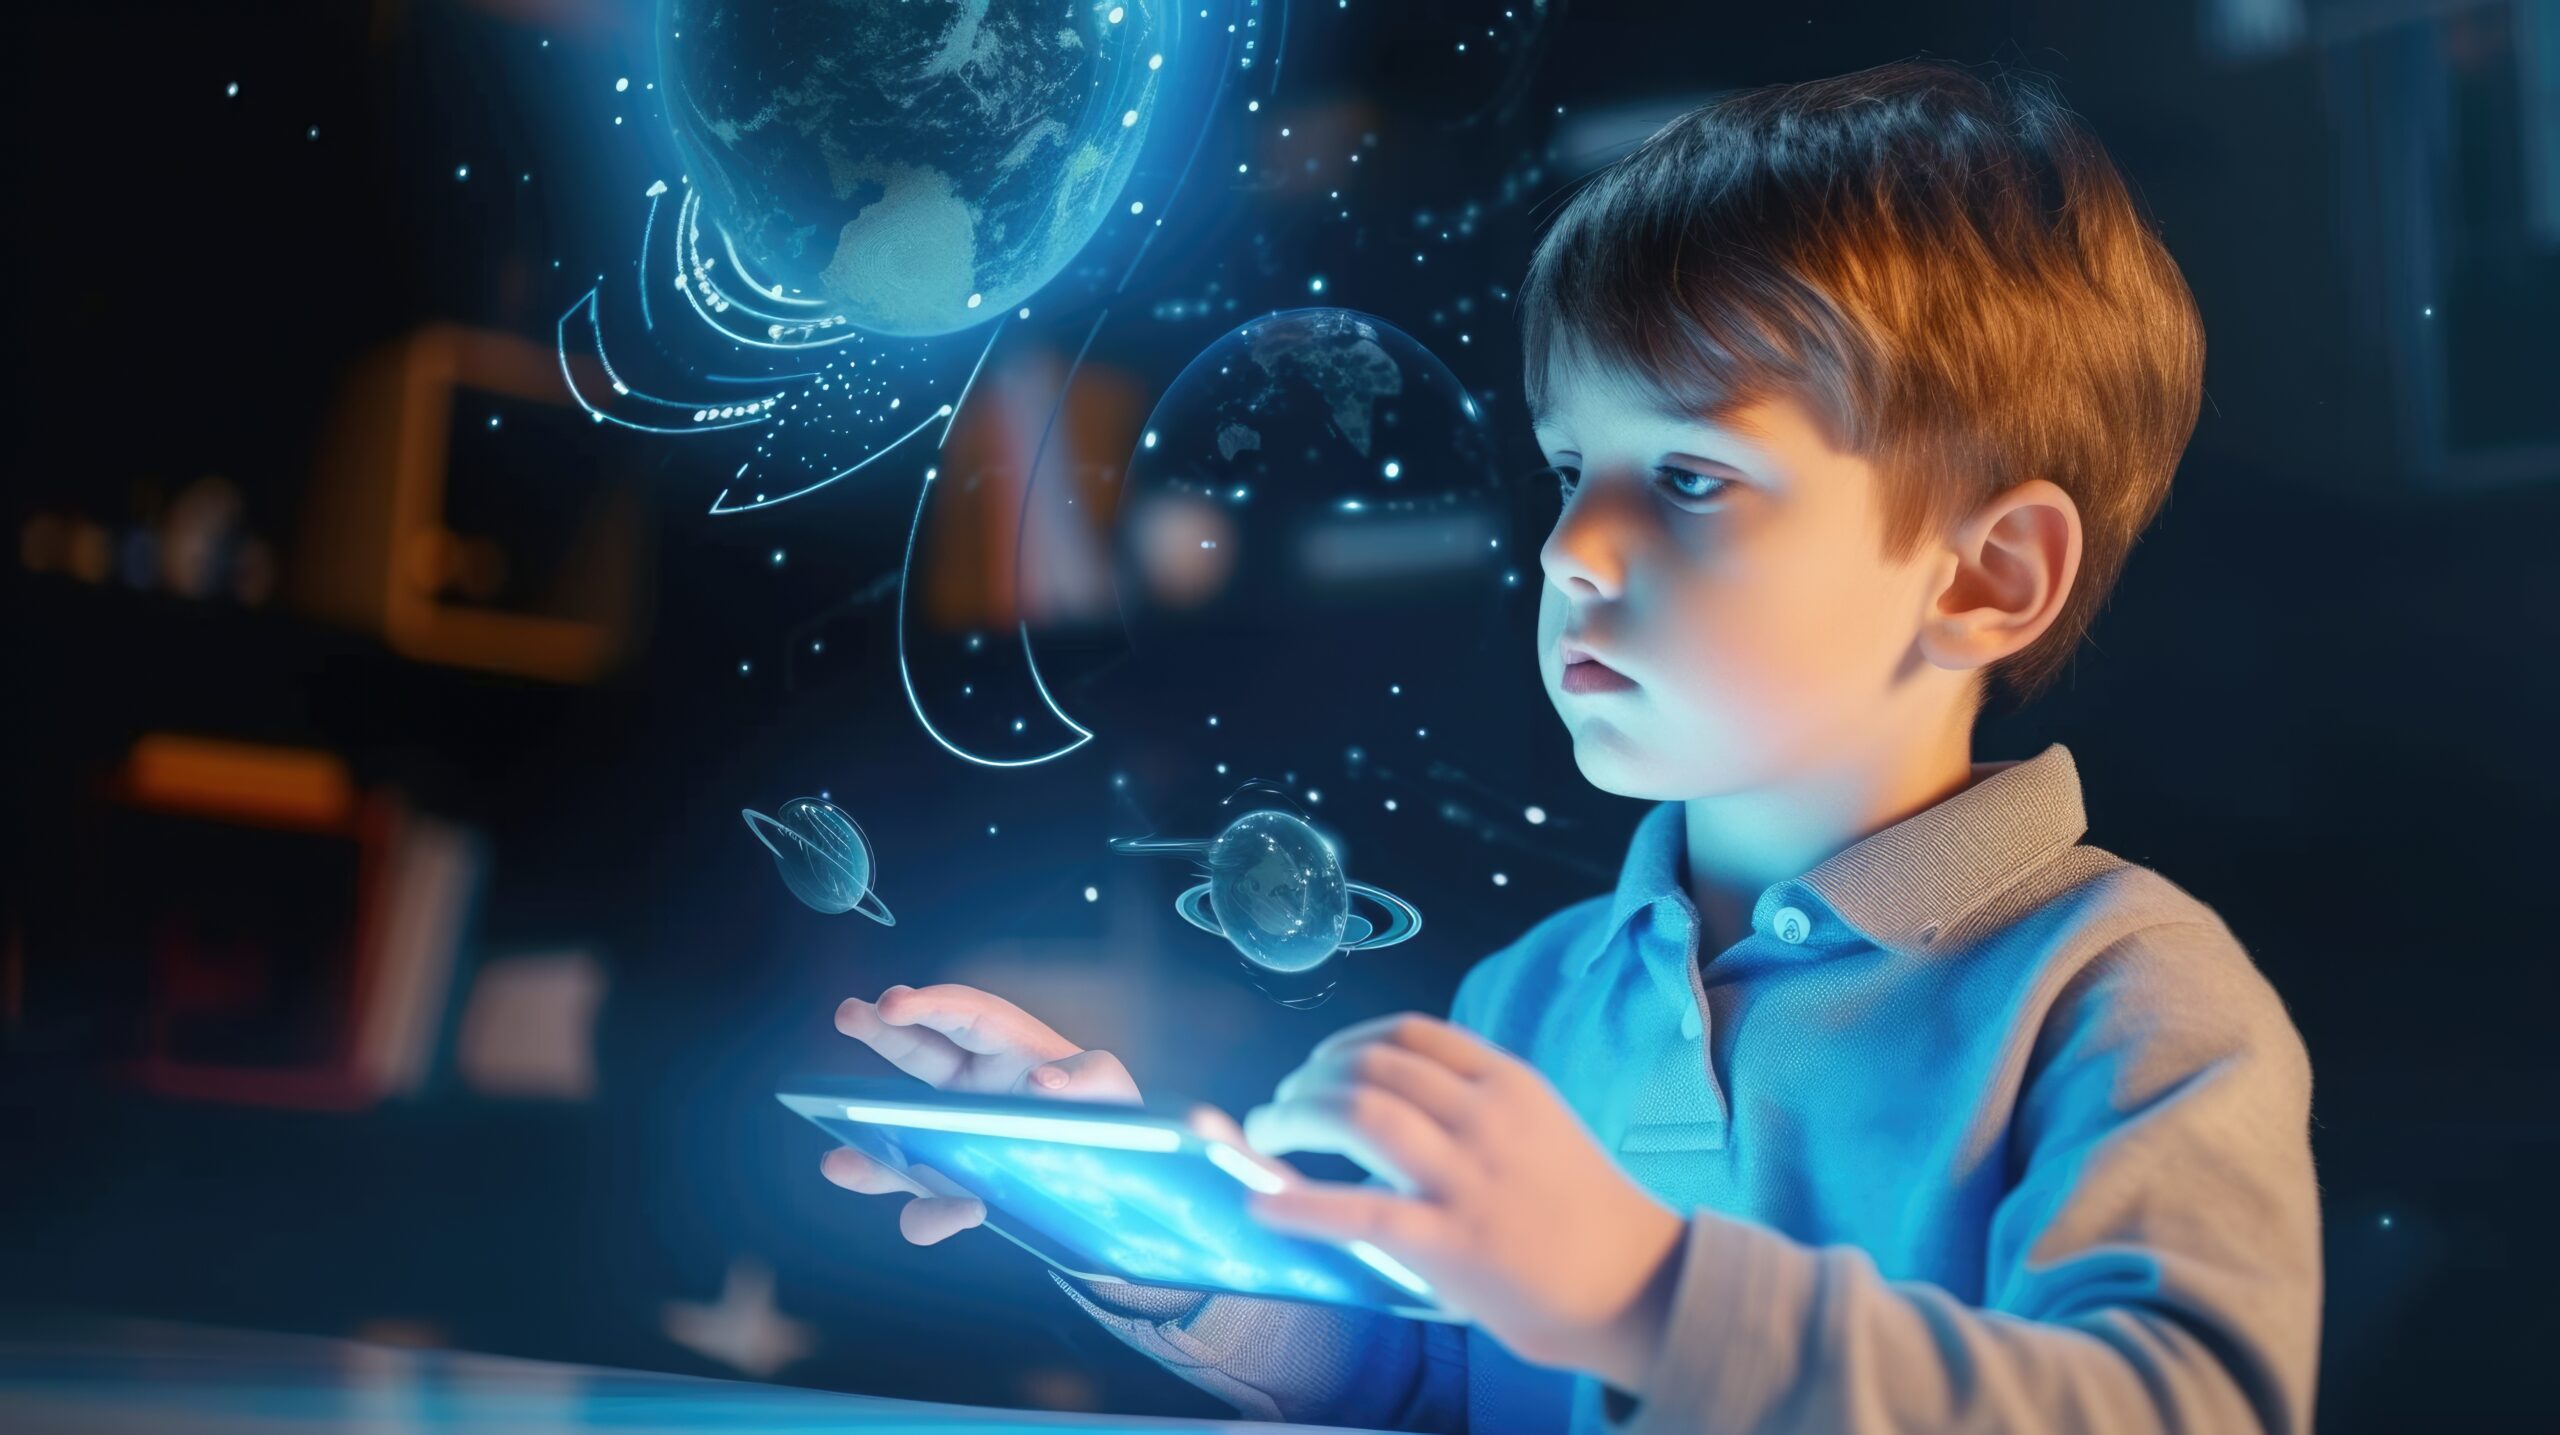 A young child exploring a virtual globe with an interactive display, showcasing a digital representation of planets and space elements.